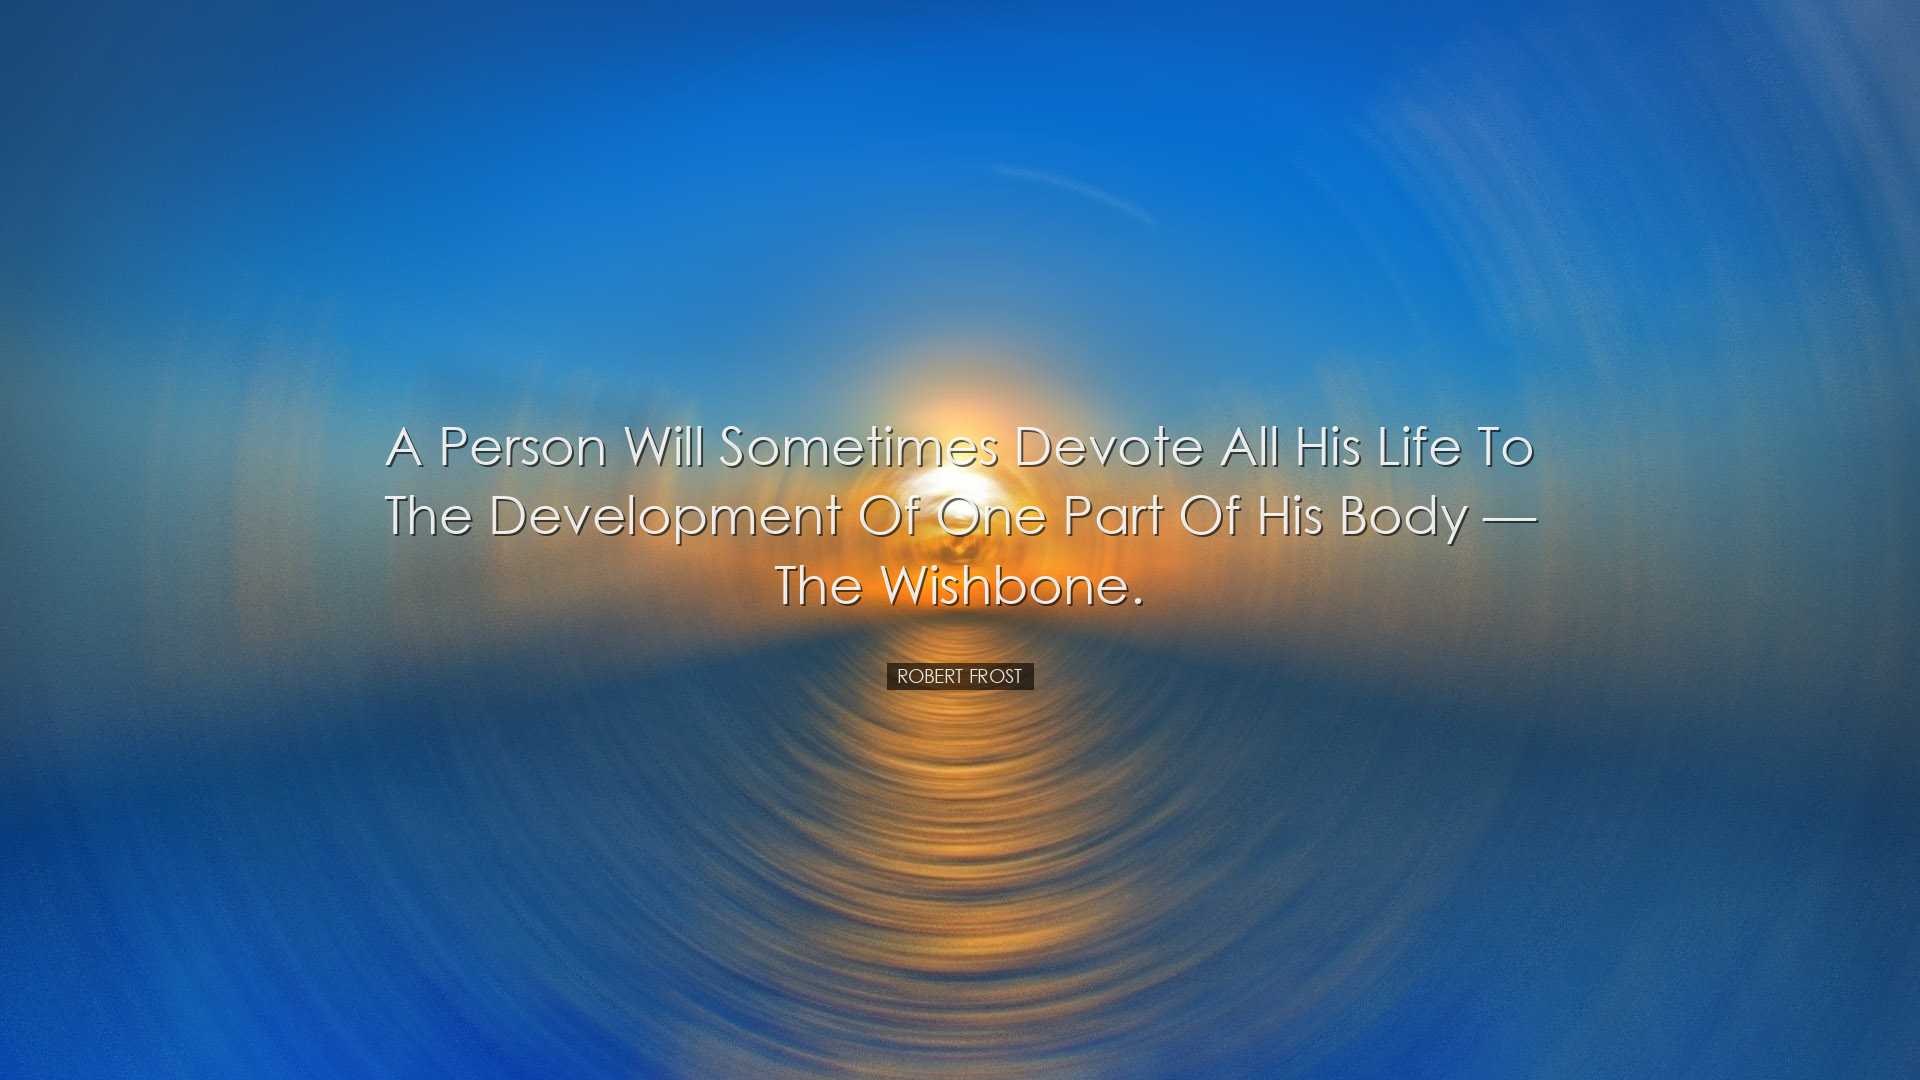 A person will sometimes devote all his life to the development of